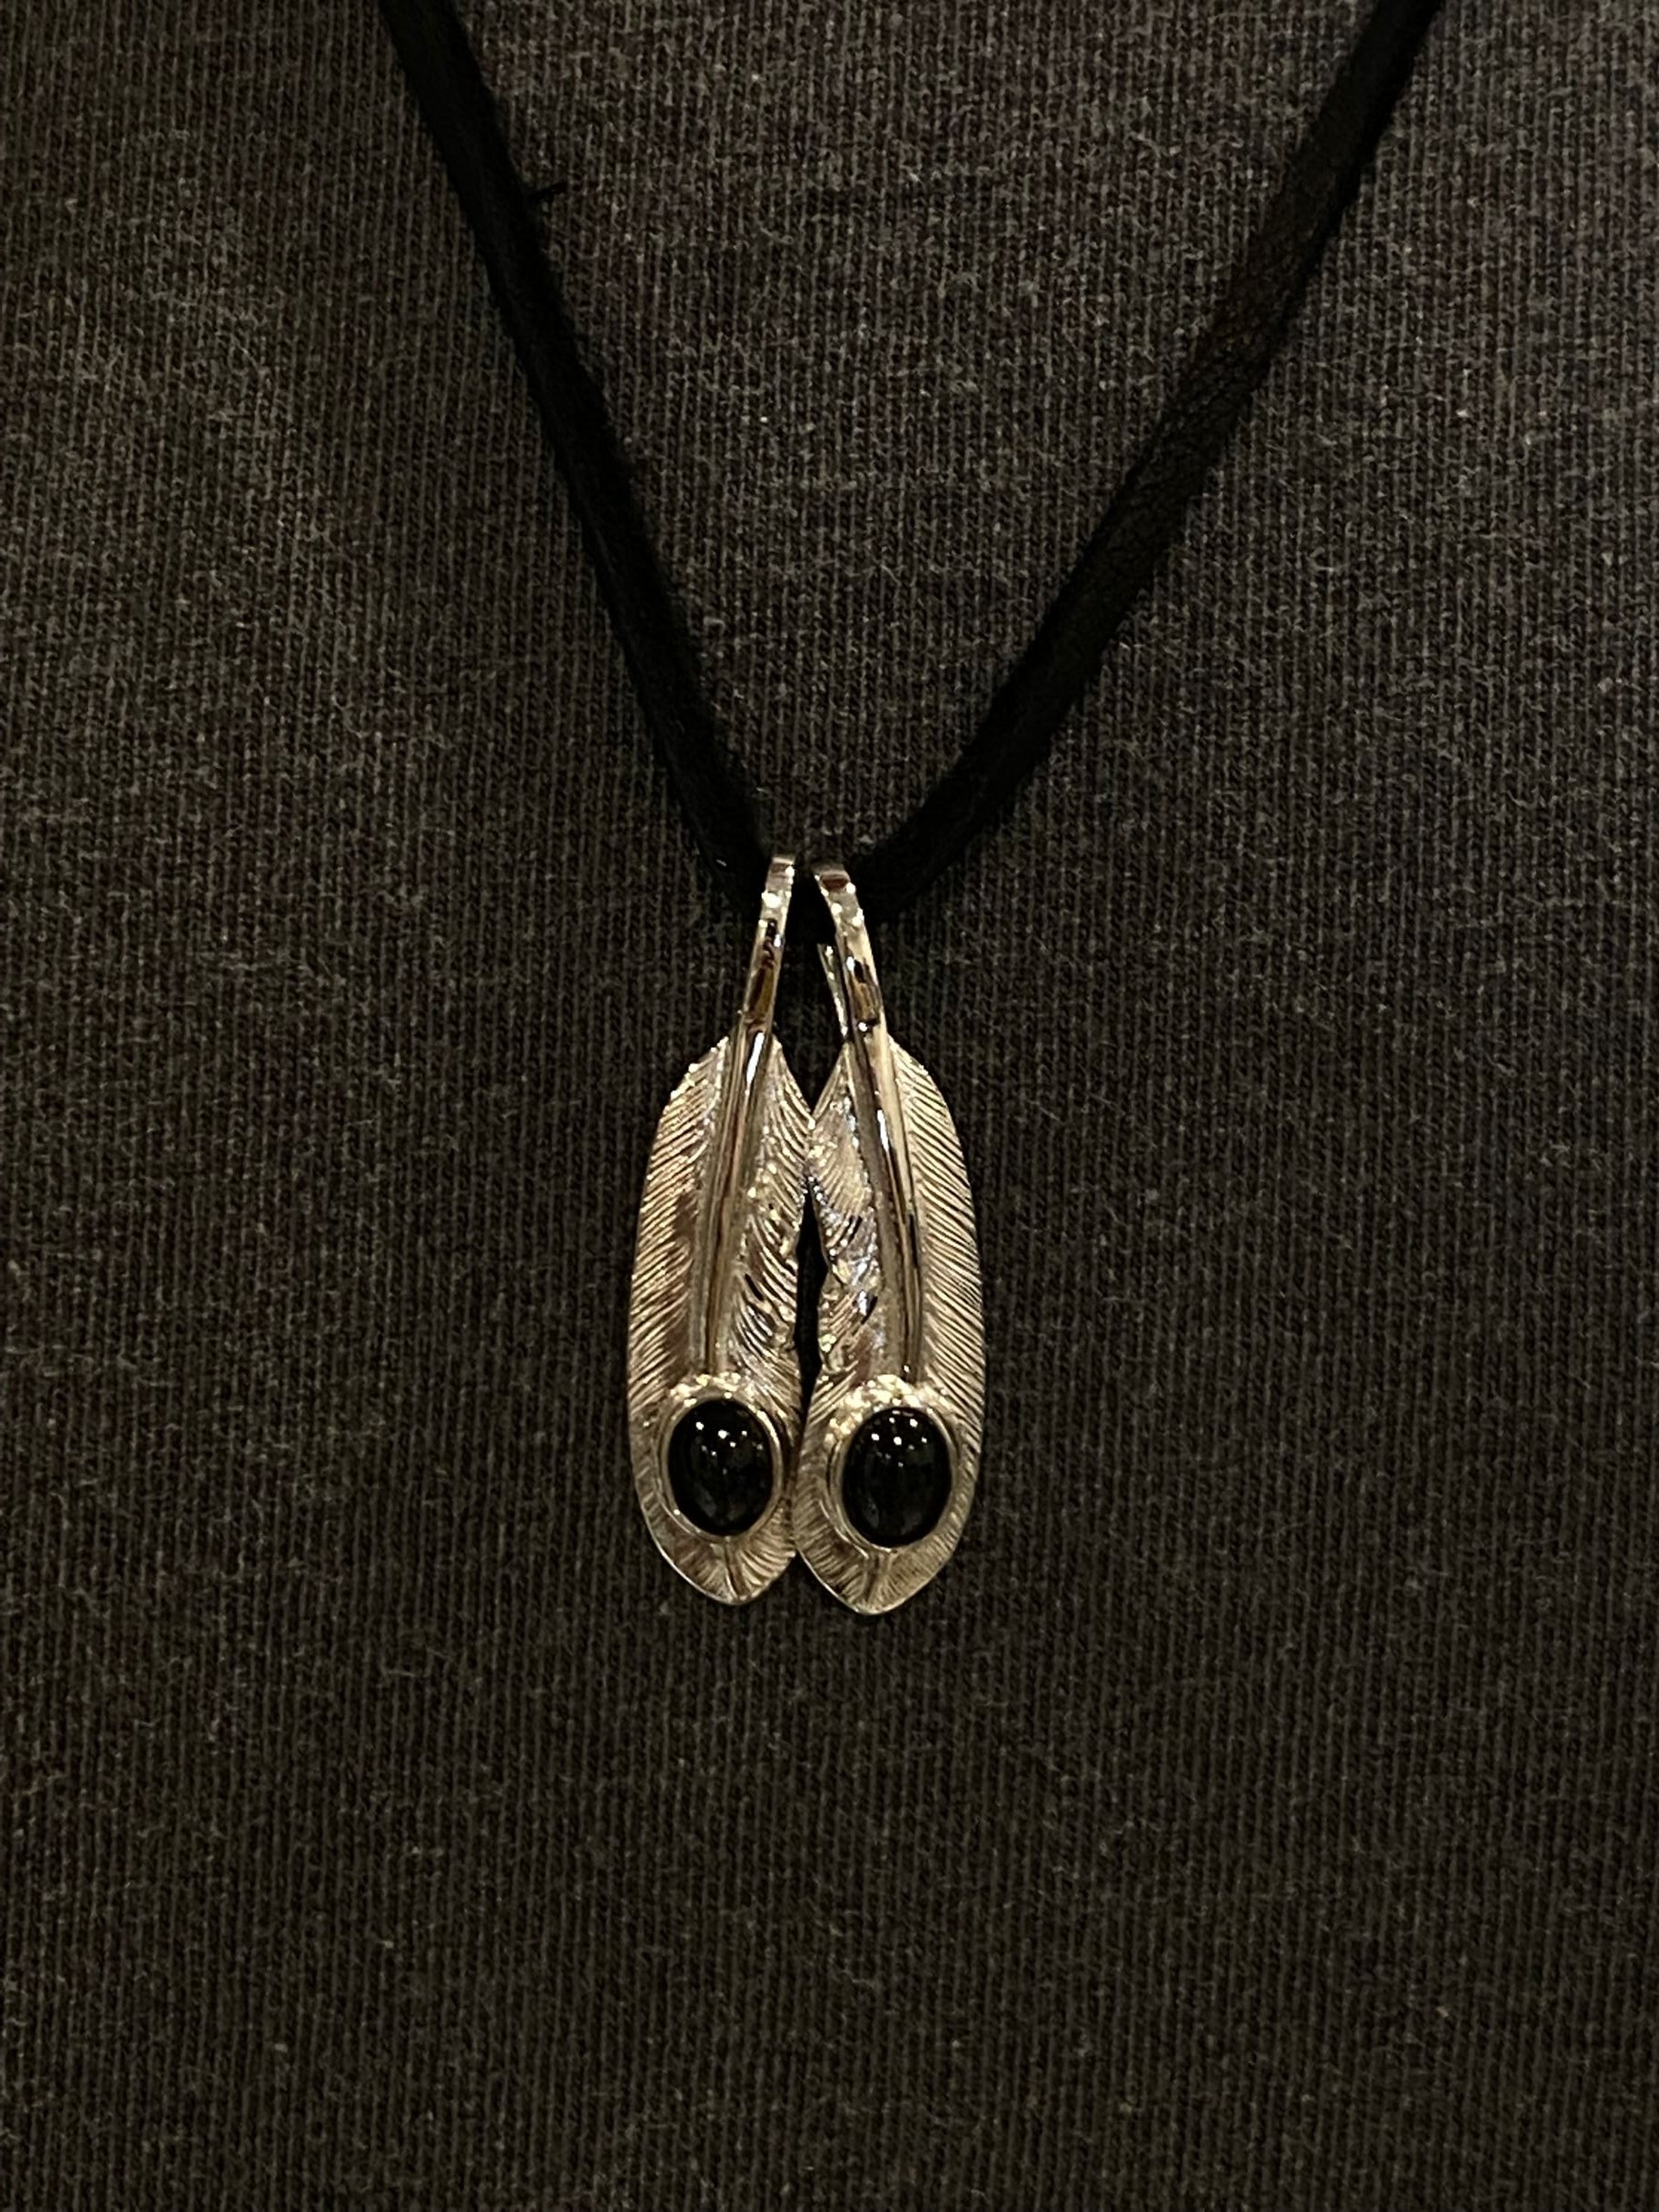 First Arrow's "Small Feather With Soulo Stone" Pendant (P-006B)